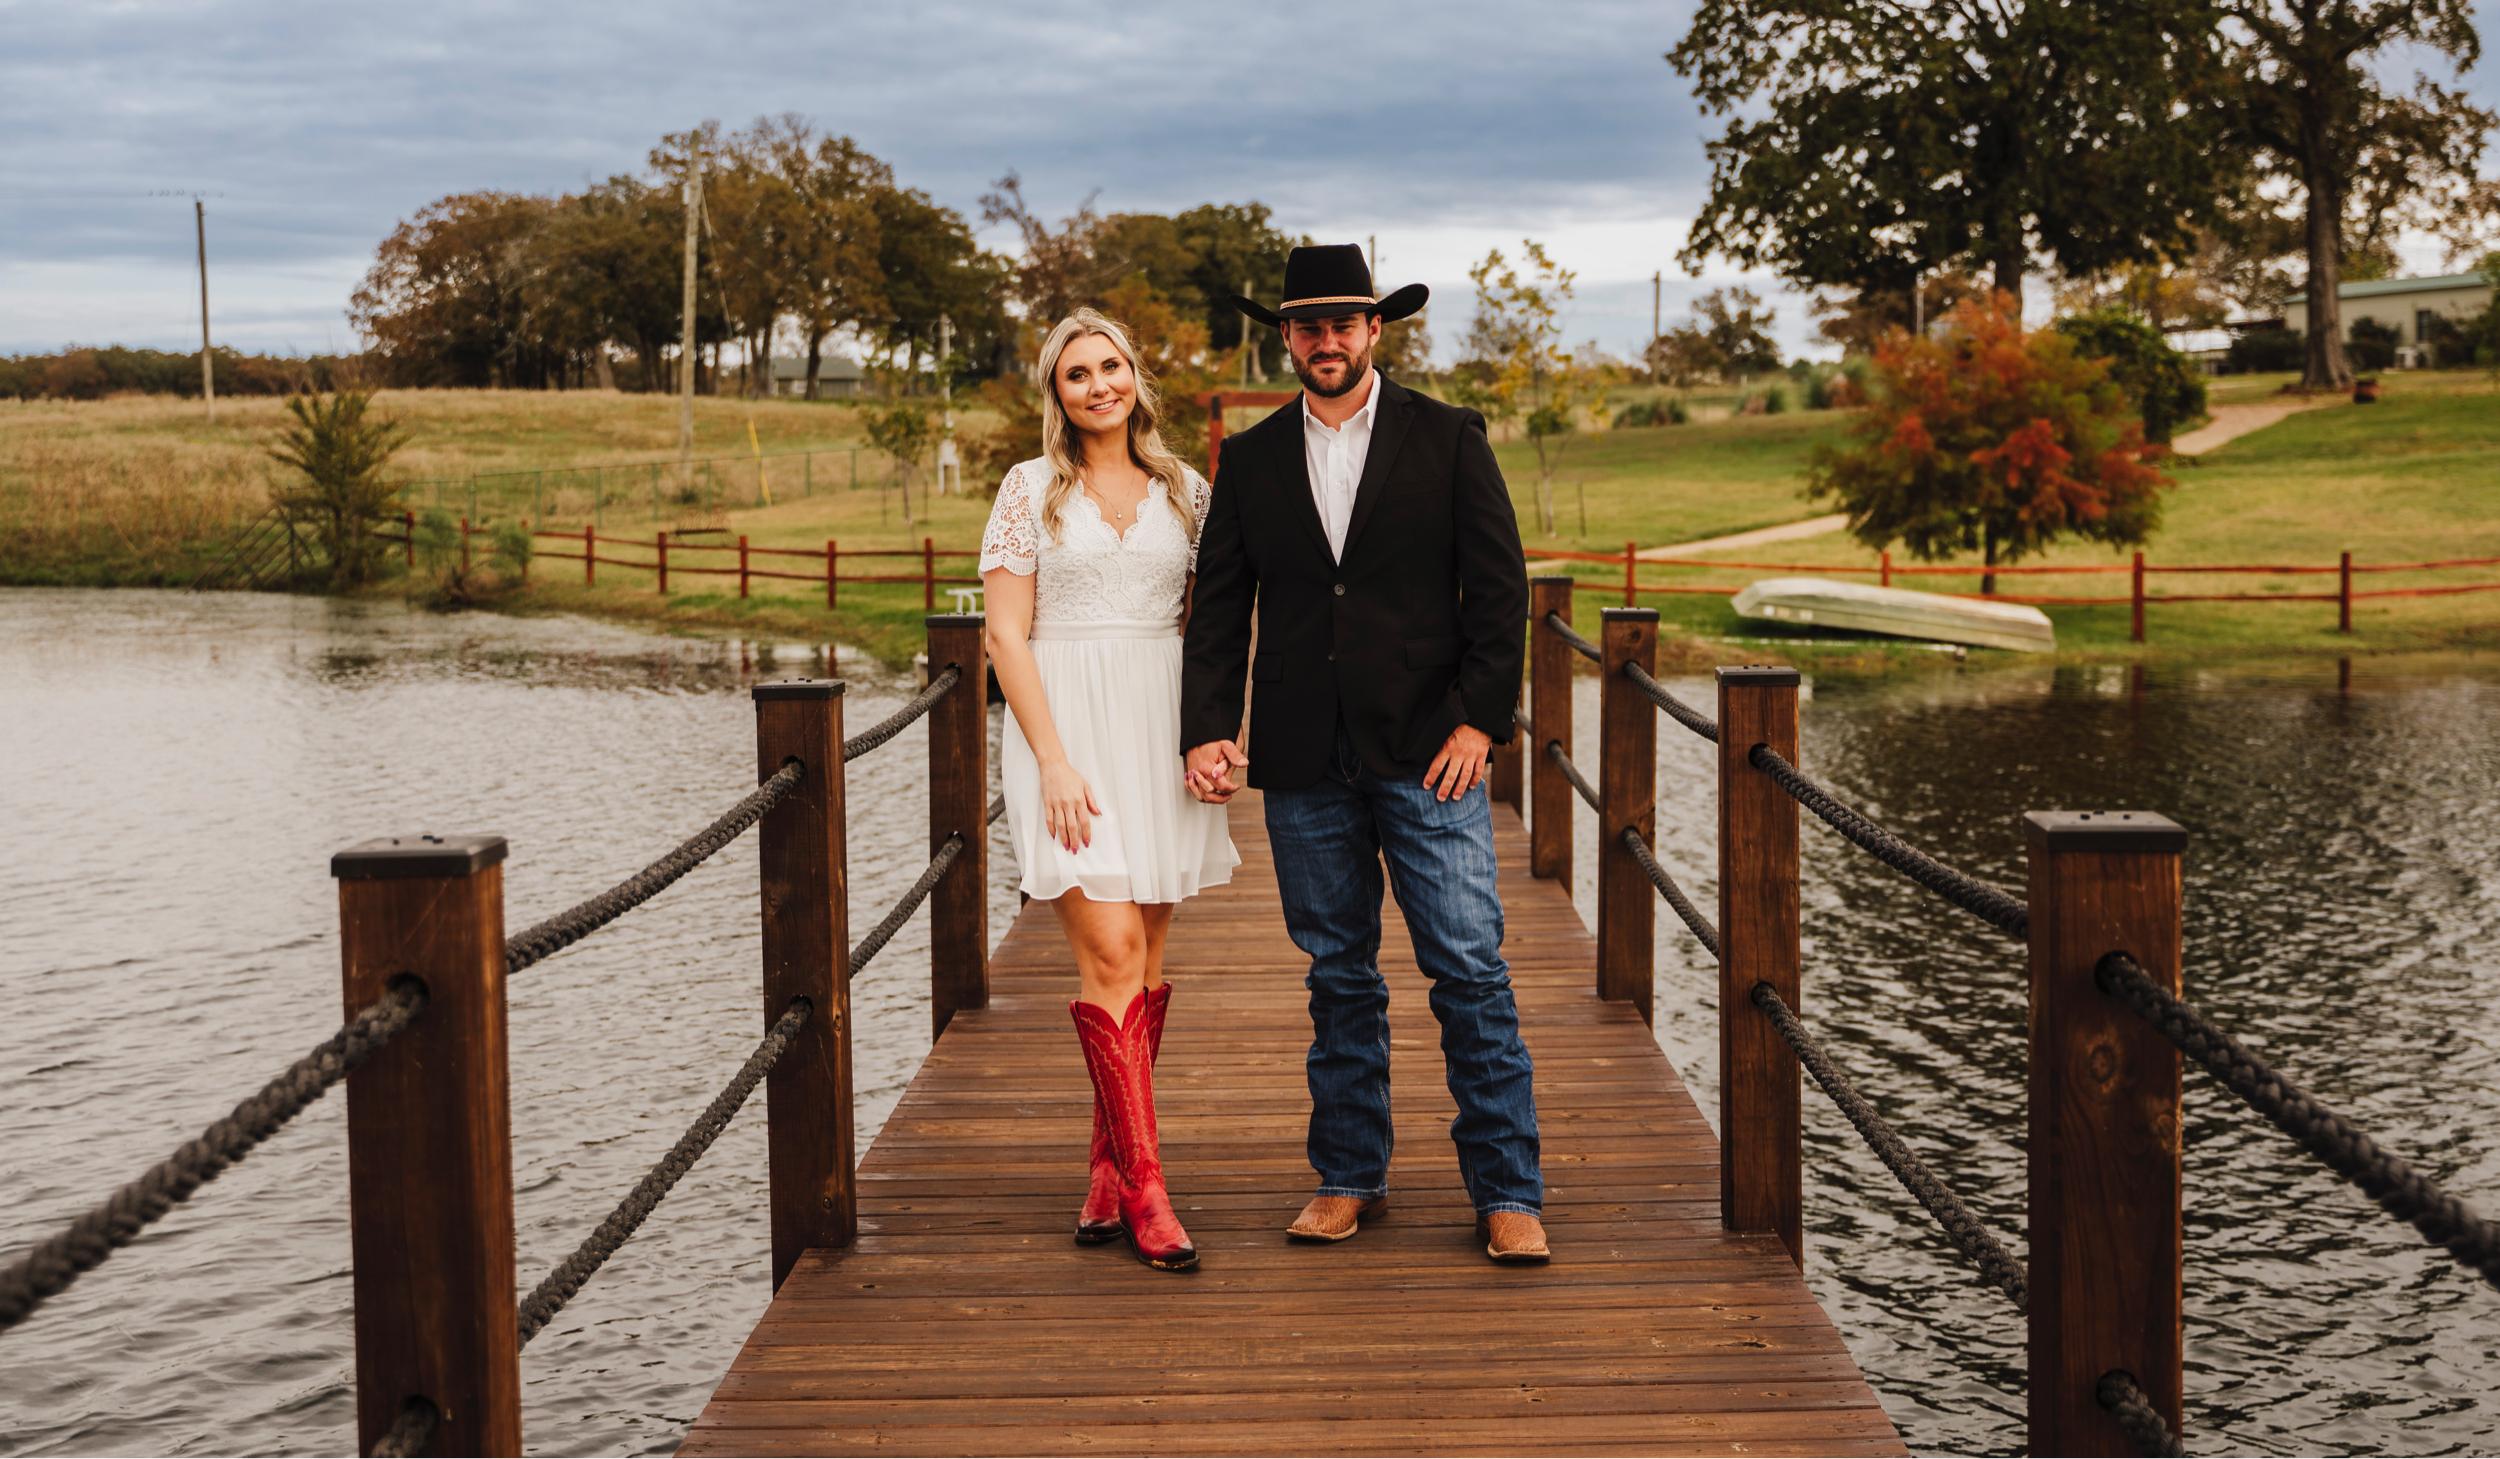 The Wedding Website of Payton Brianne Tucker and Coby Lane Carver